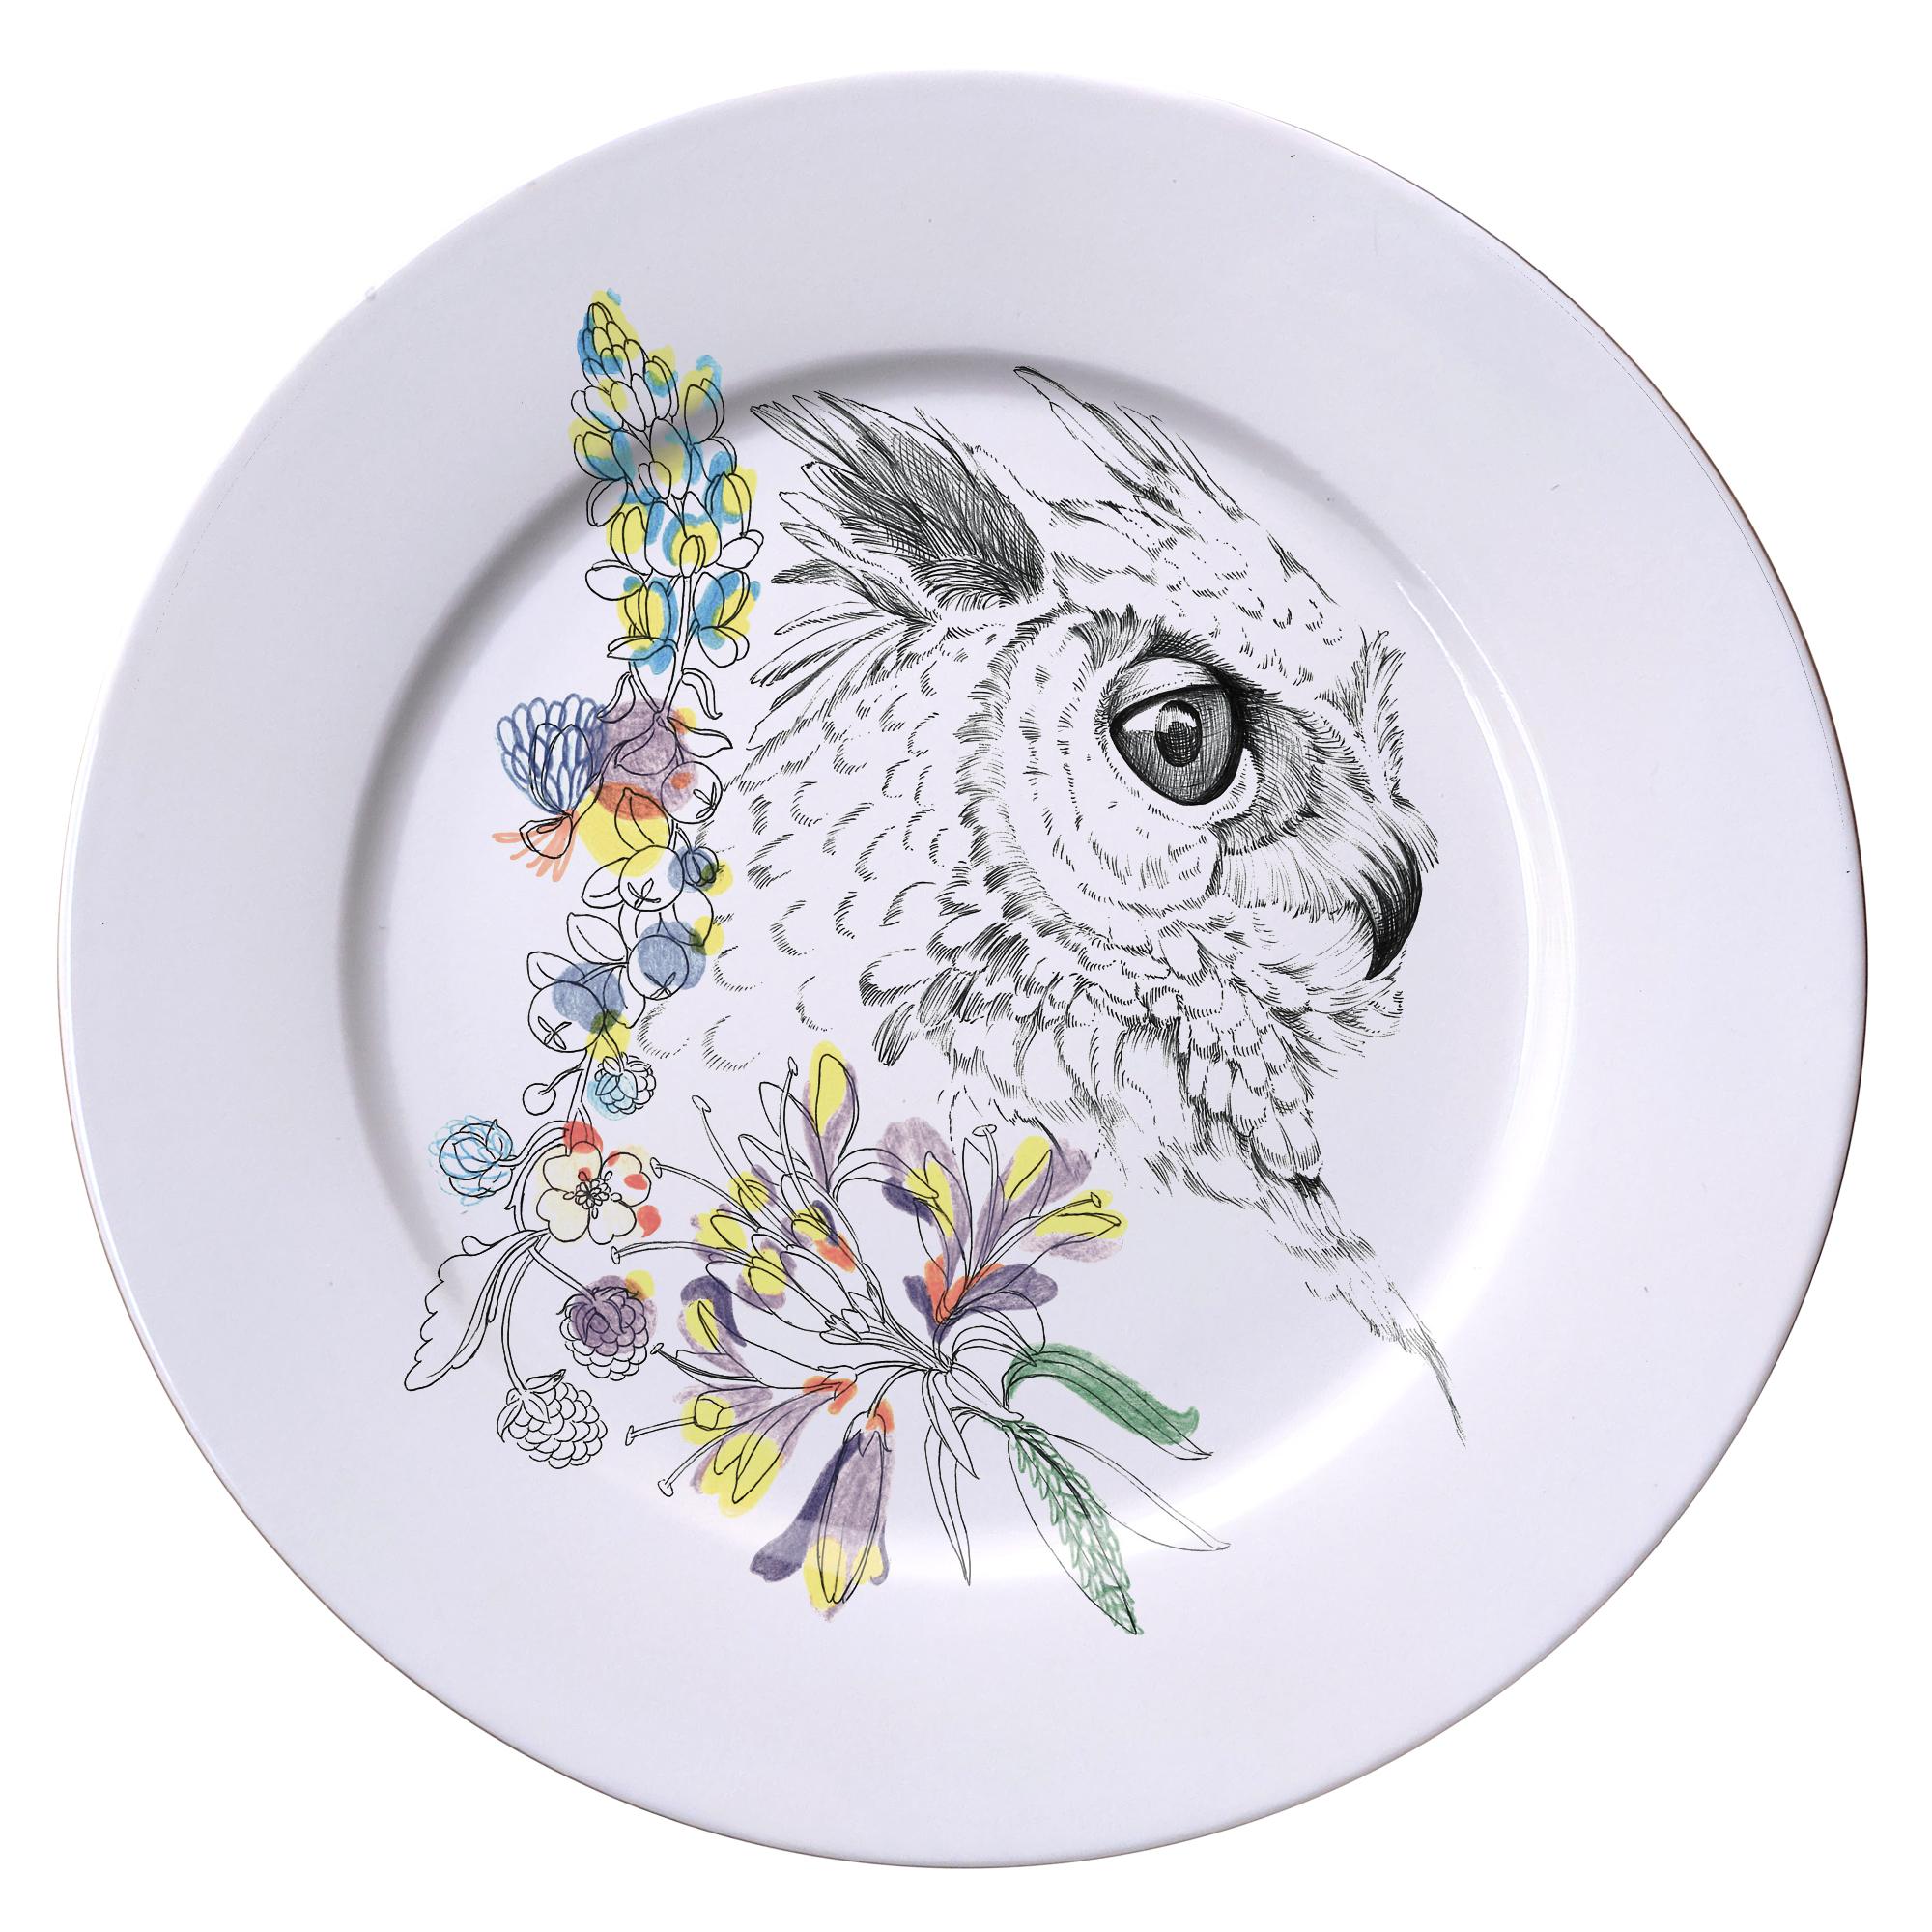 Ode to the Woods, Contemporary Porcelain Dinner Plate with Owl and Flowers